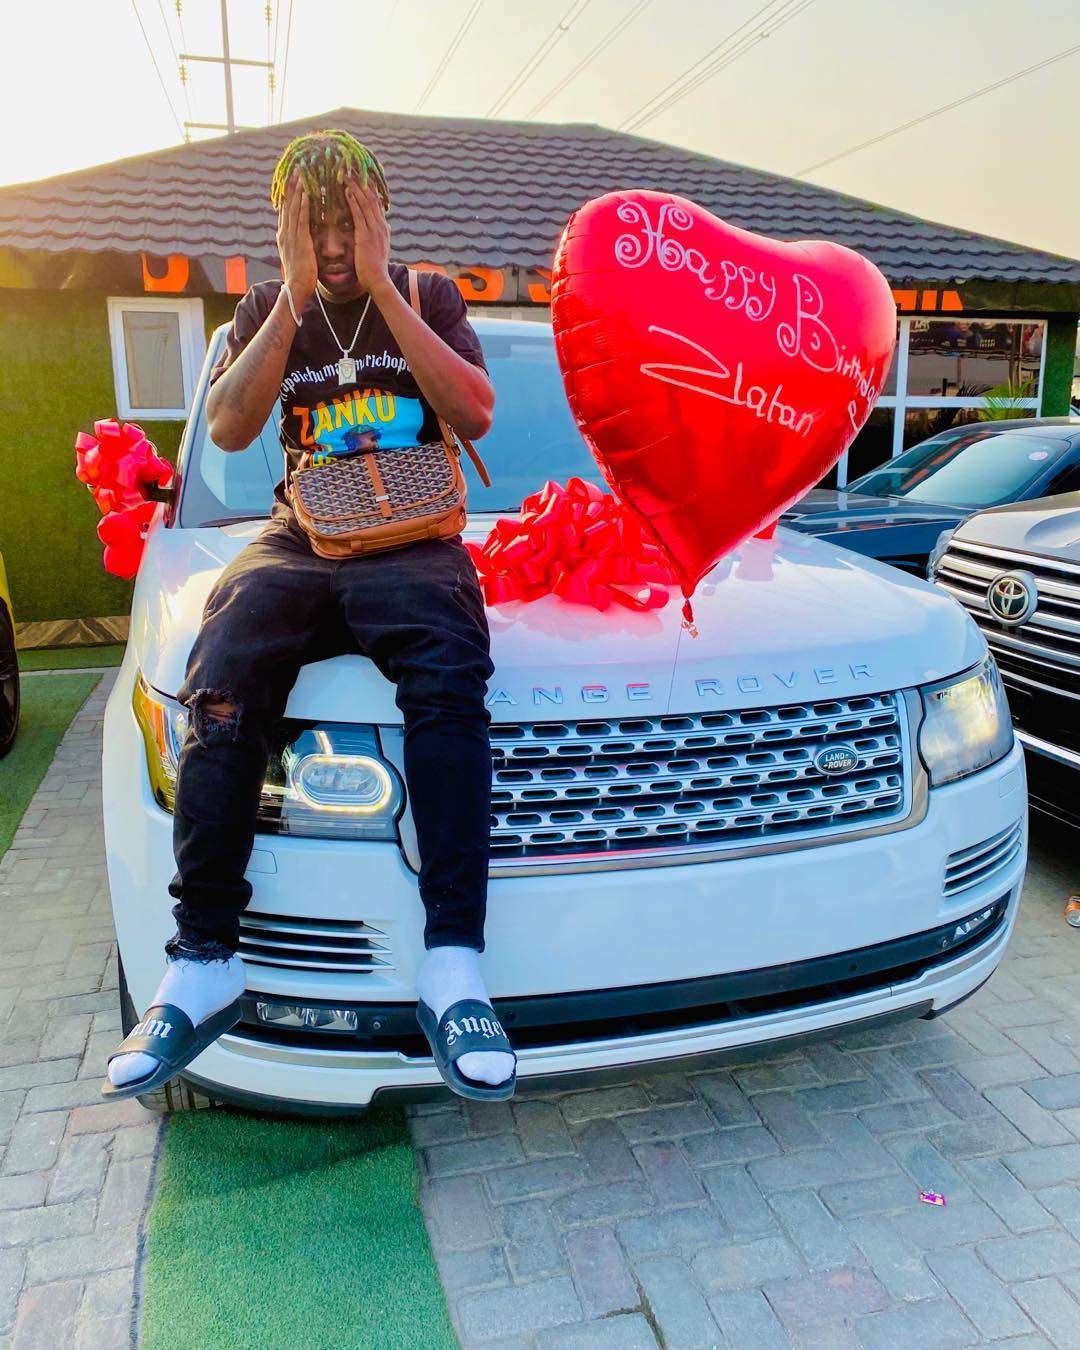 Zlatan Ibile buys Himself a Range Rover for his 25th birthday